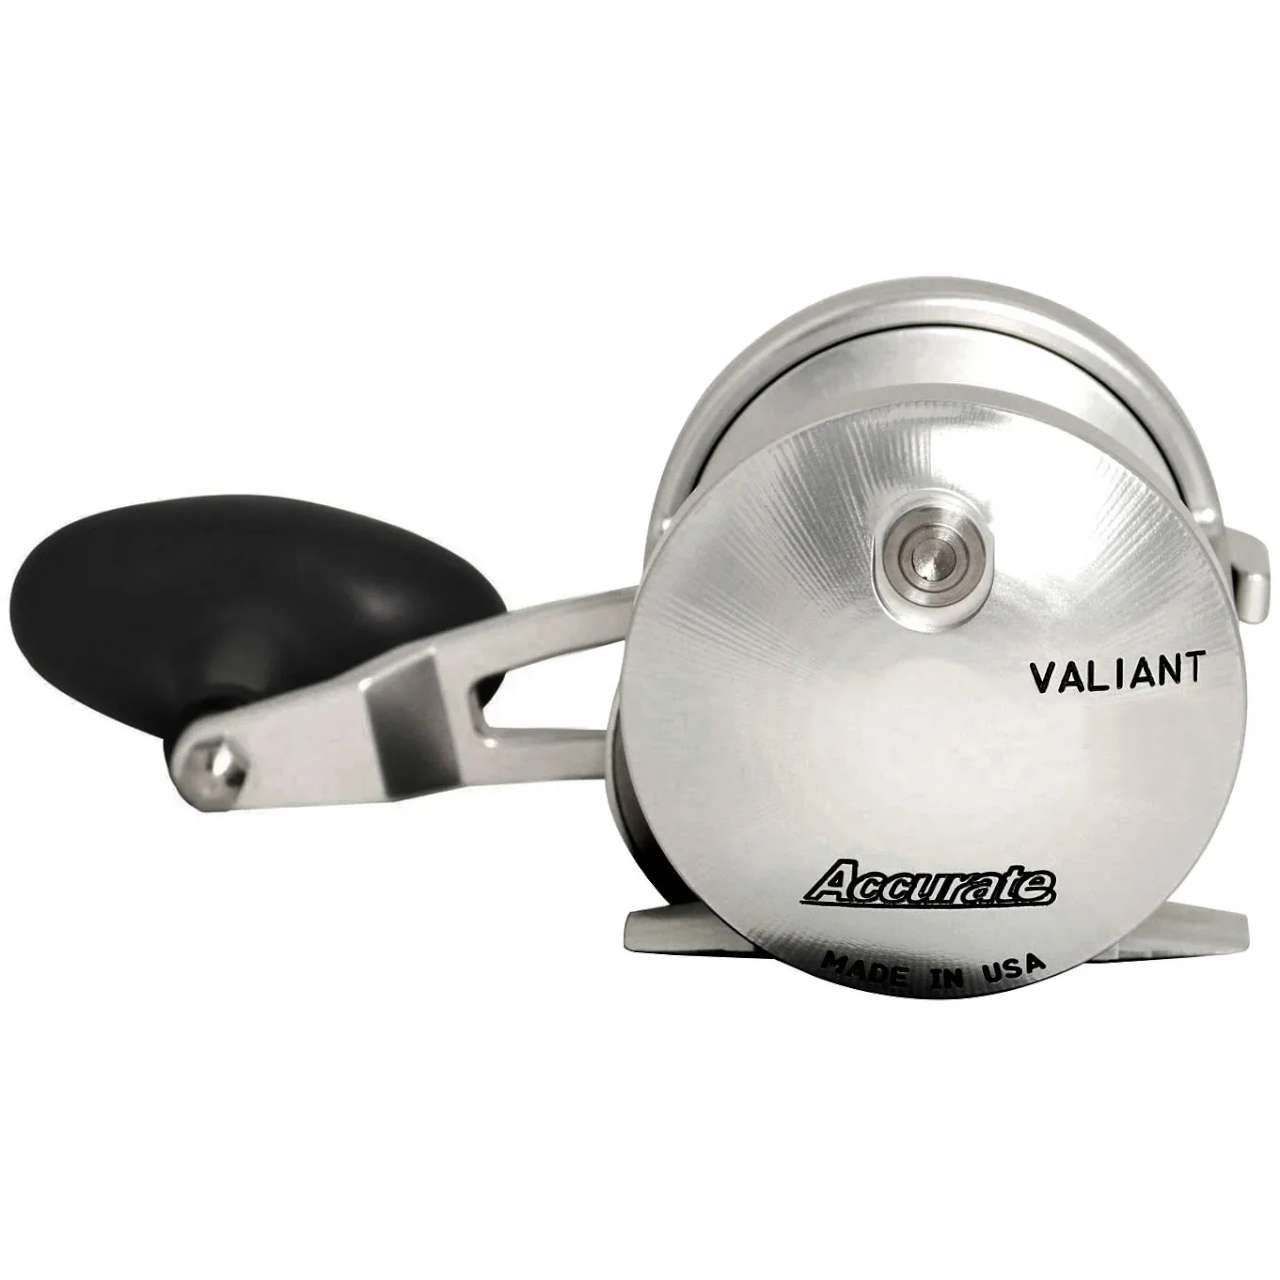 Accurate BV2-1000 Boss Valiant Conventional Reels - TackleDirect